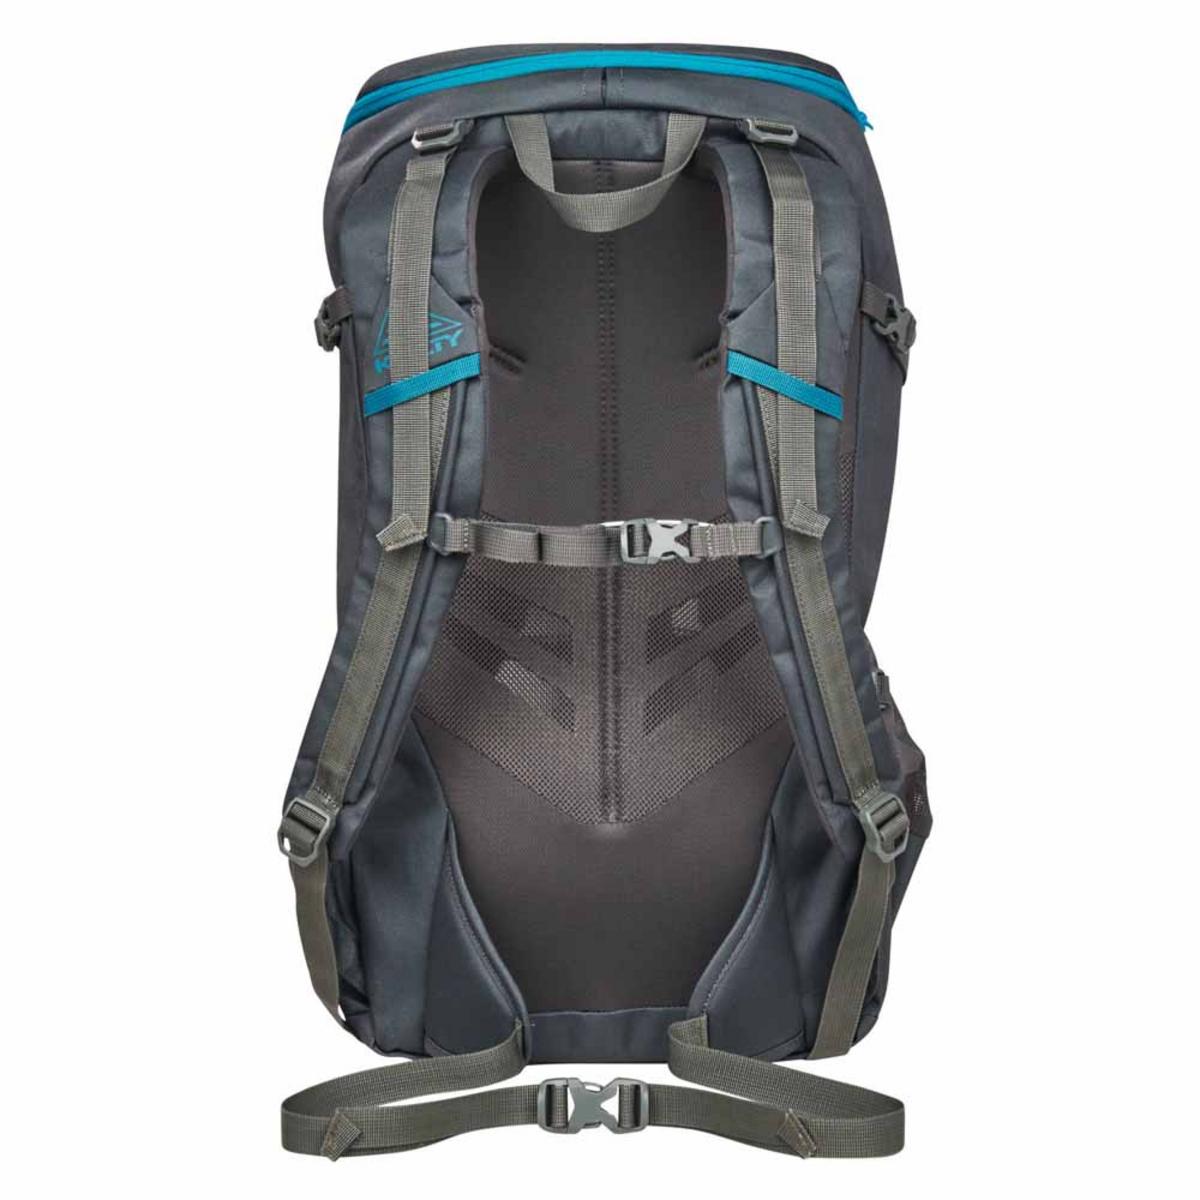 Kelty Asher 35L Backpack